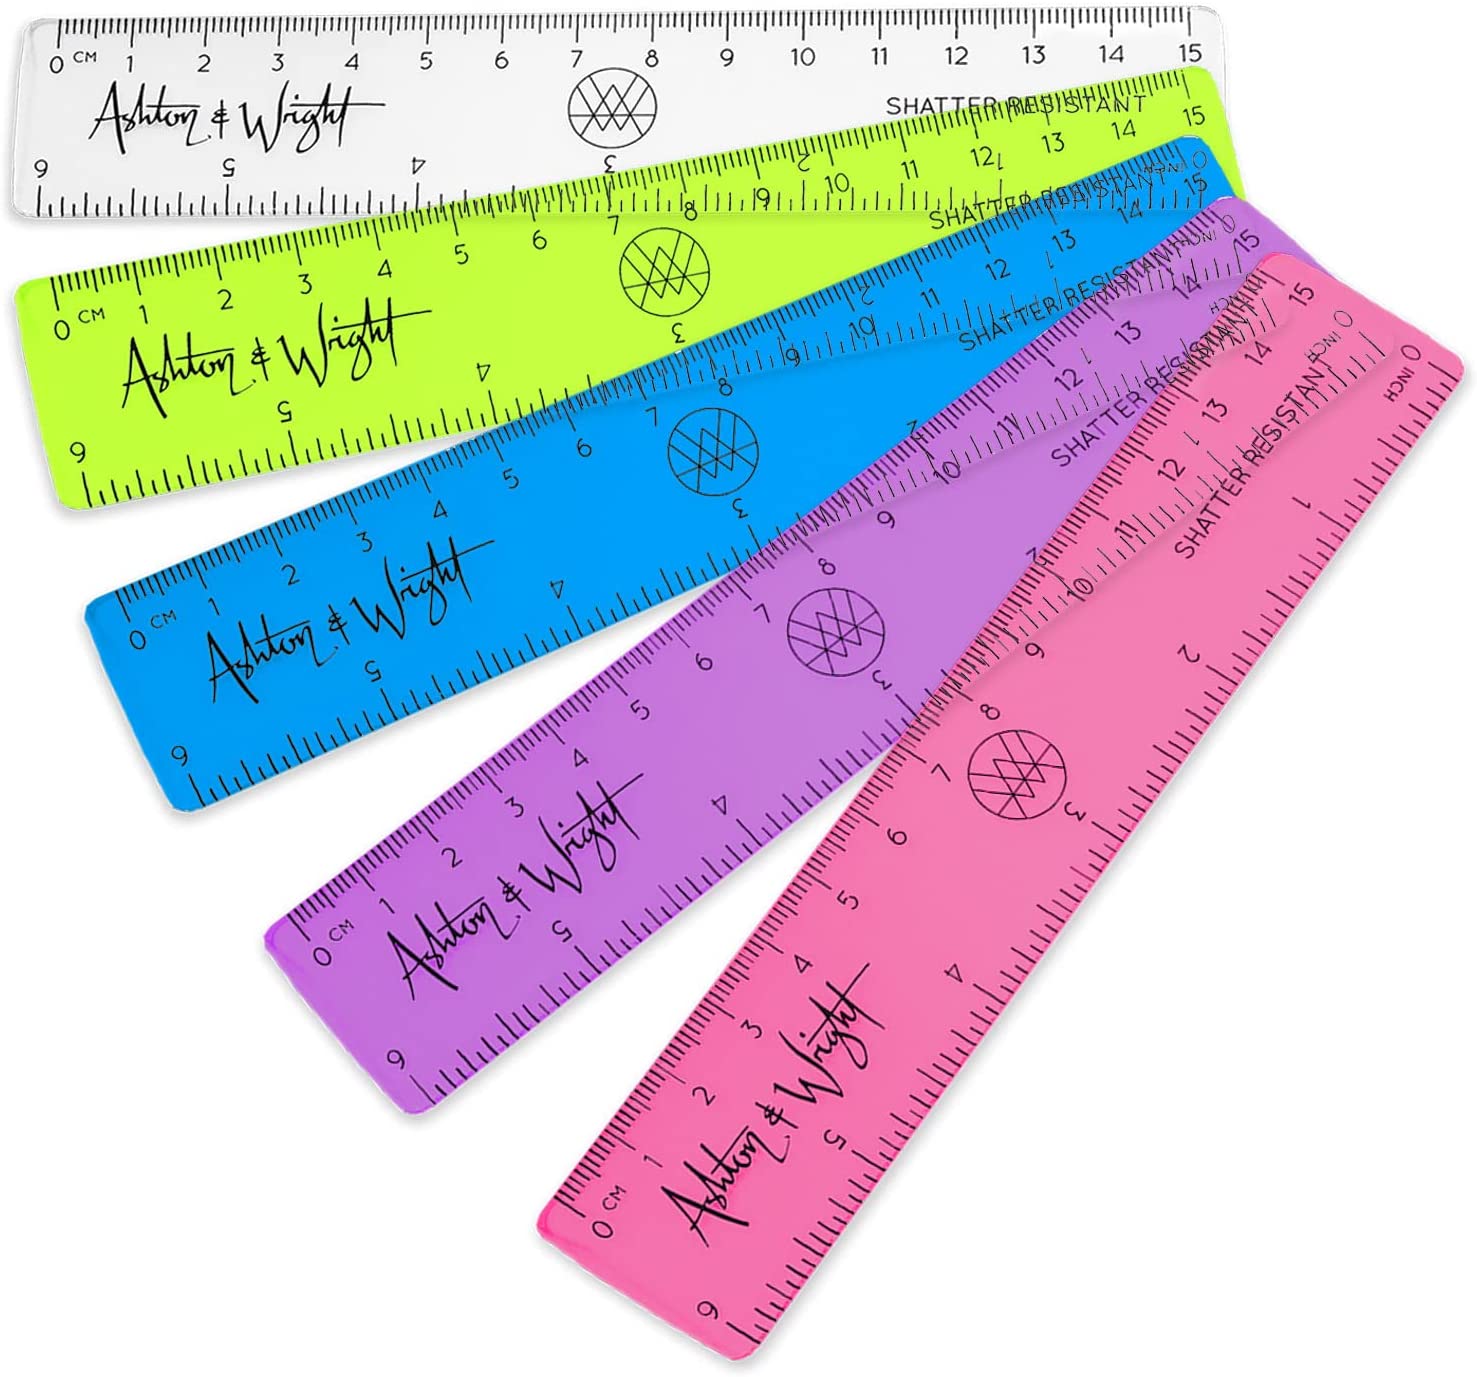 Ashton & Wright 5 Pack Multicoloured Shatter Resistant Rulers RRP 3.99 CLEARANCE XL 2.99